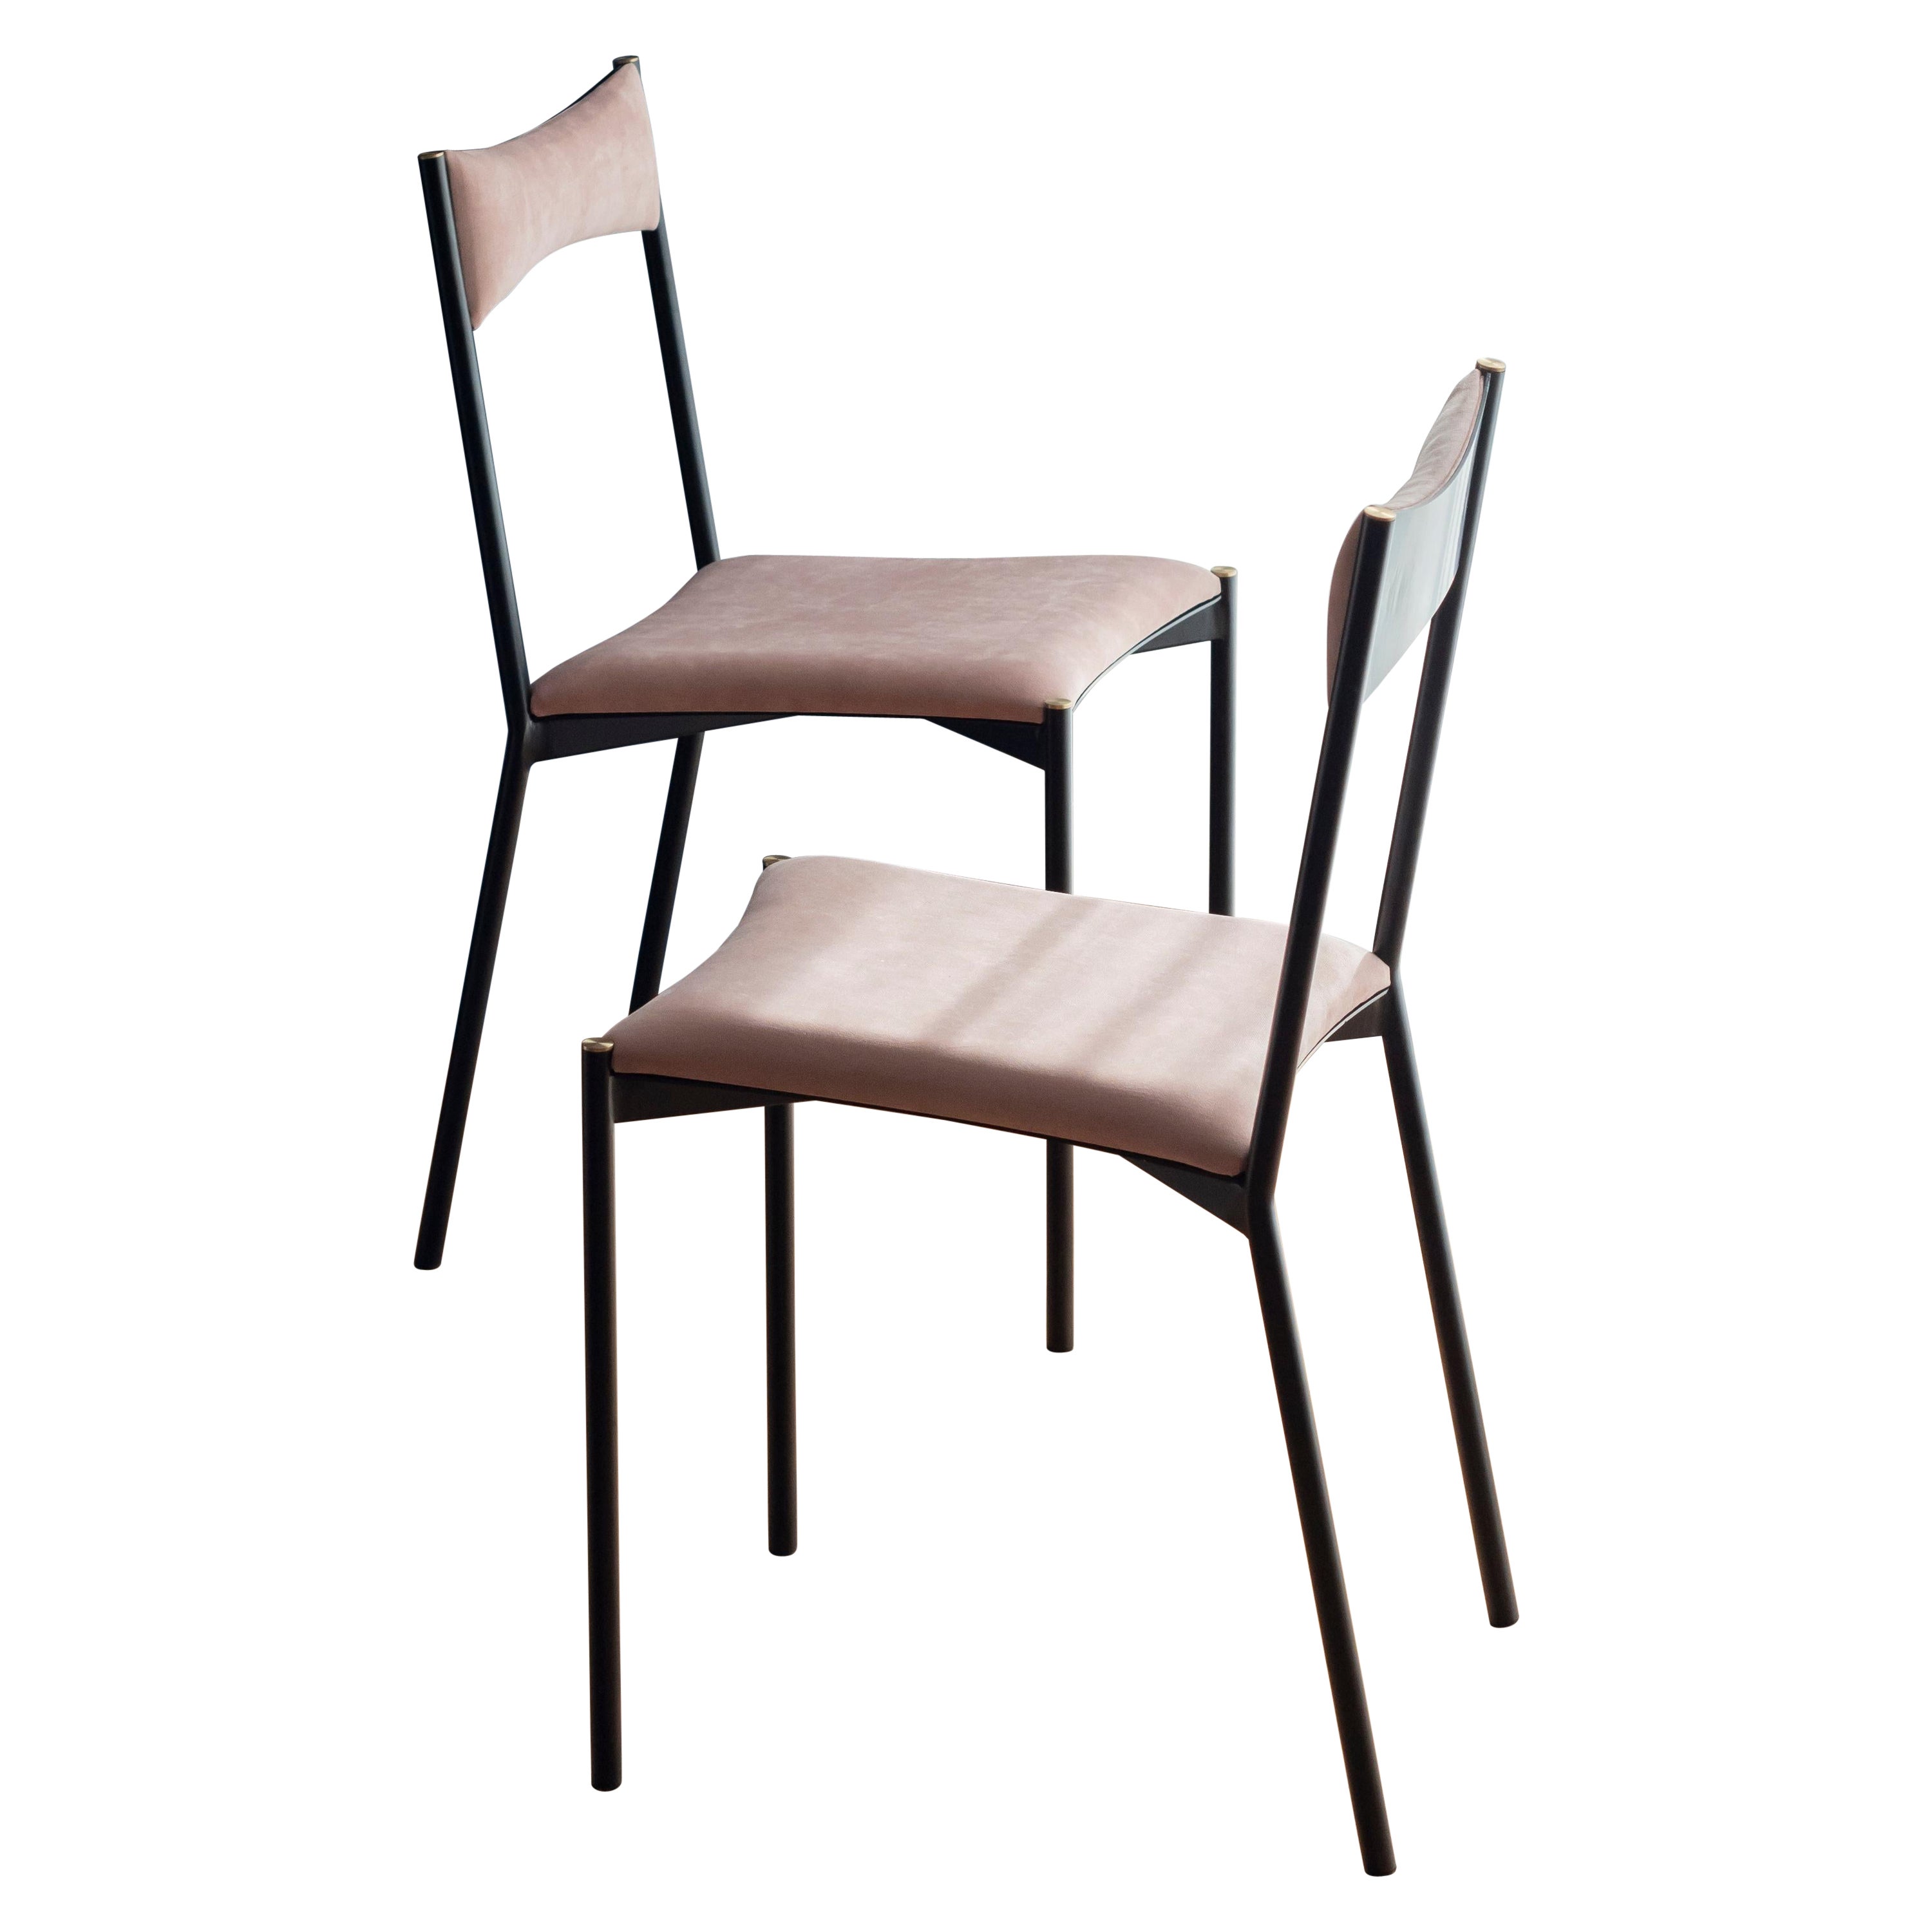 Set of 2 Tensa Chairs, Pink by Ries